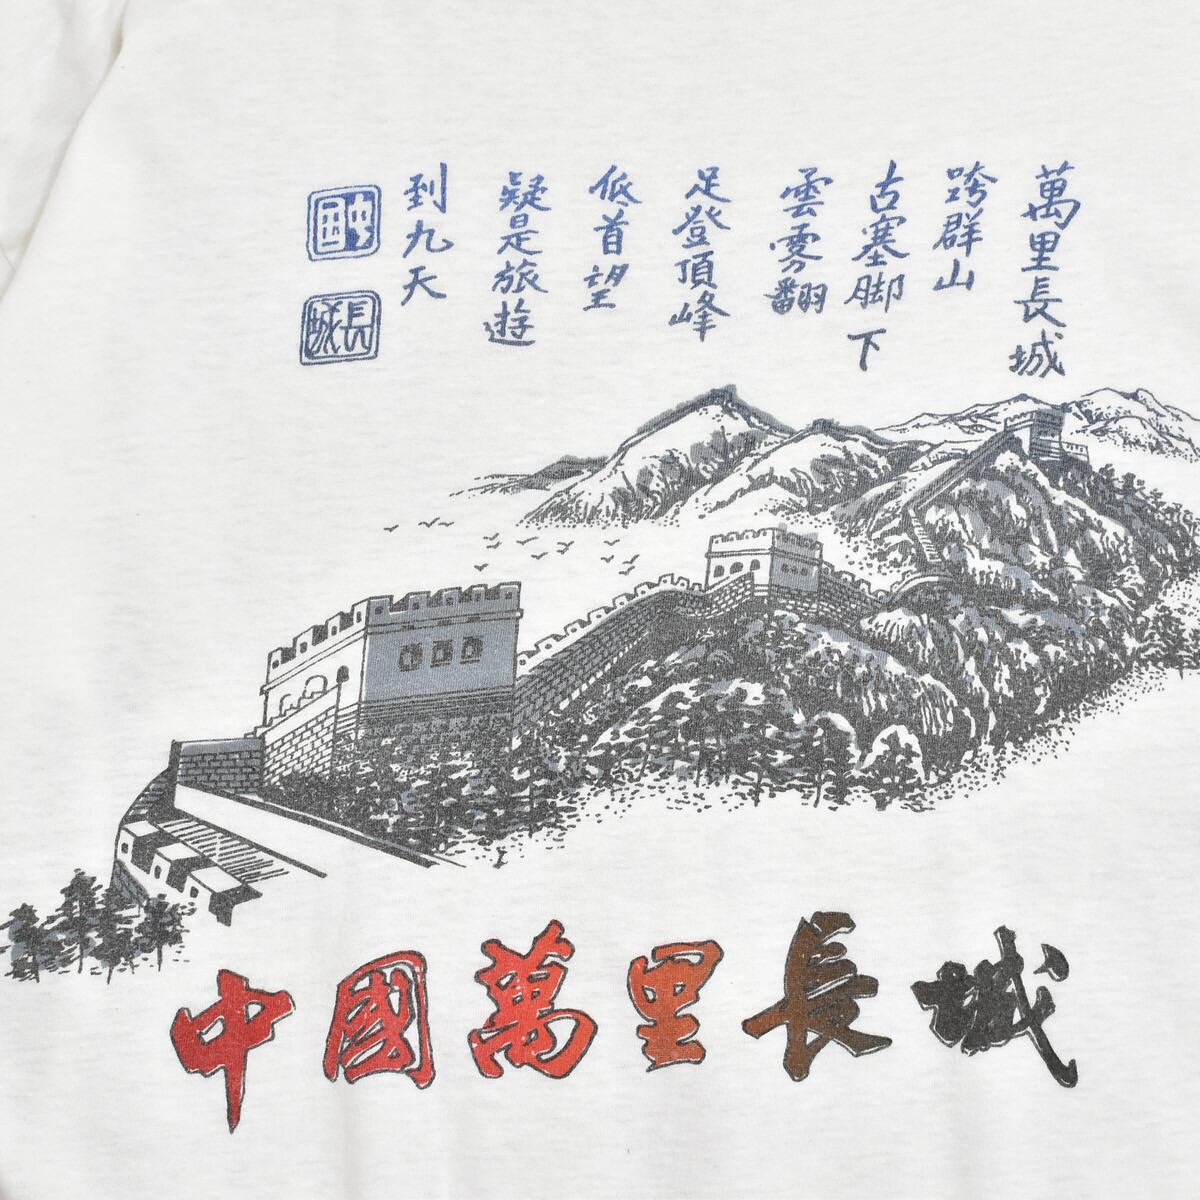 THE GREAT CHINA WALL 中国長城 HARLEY Tシャツ L